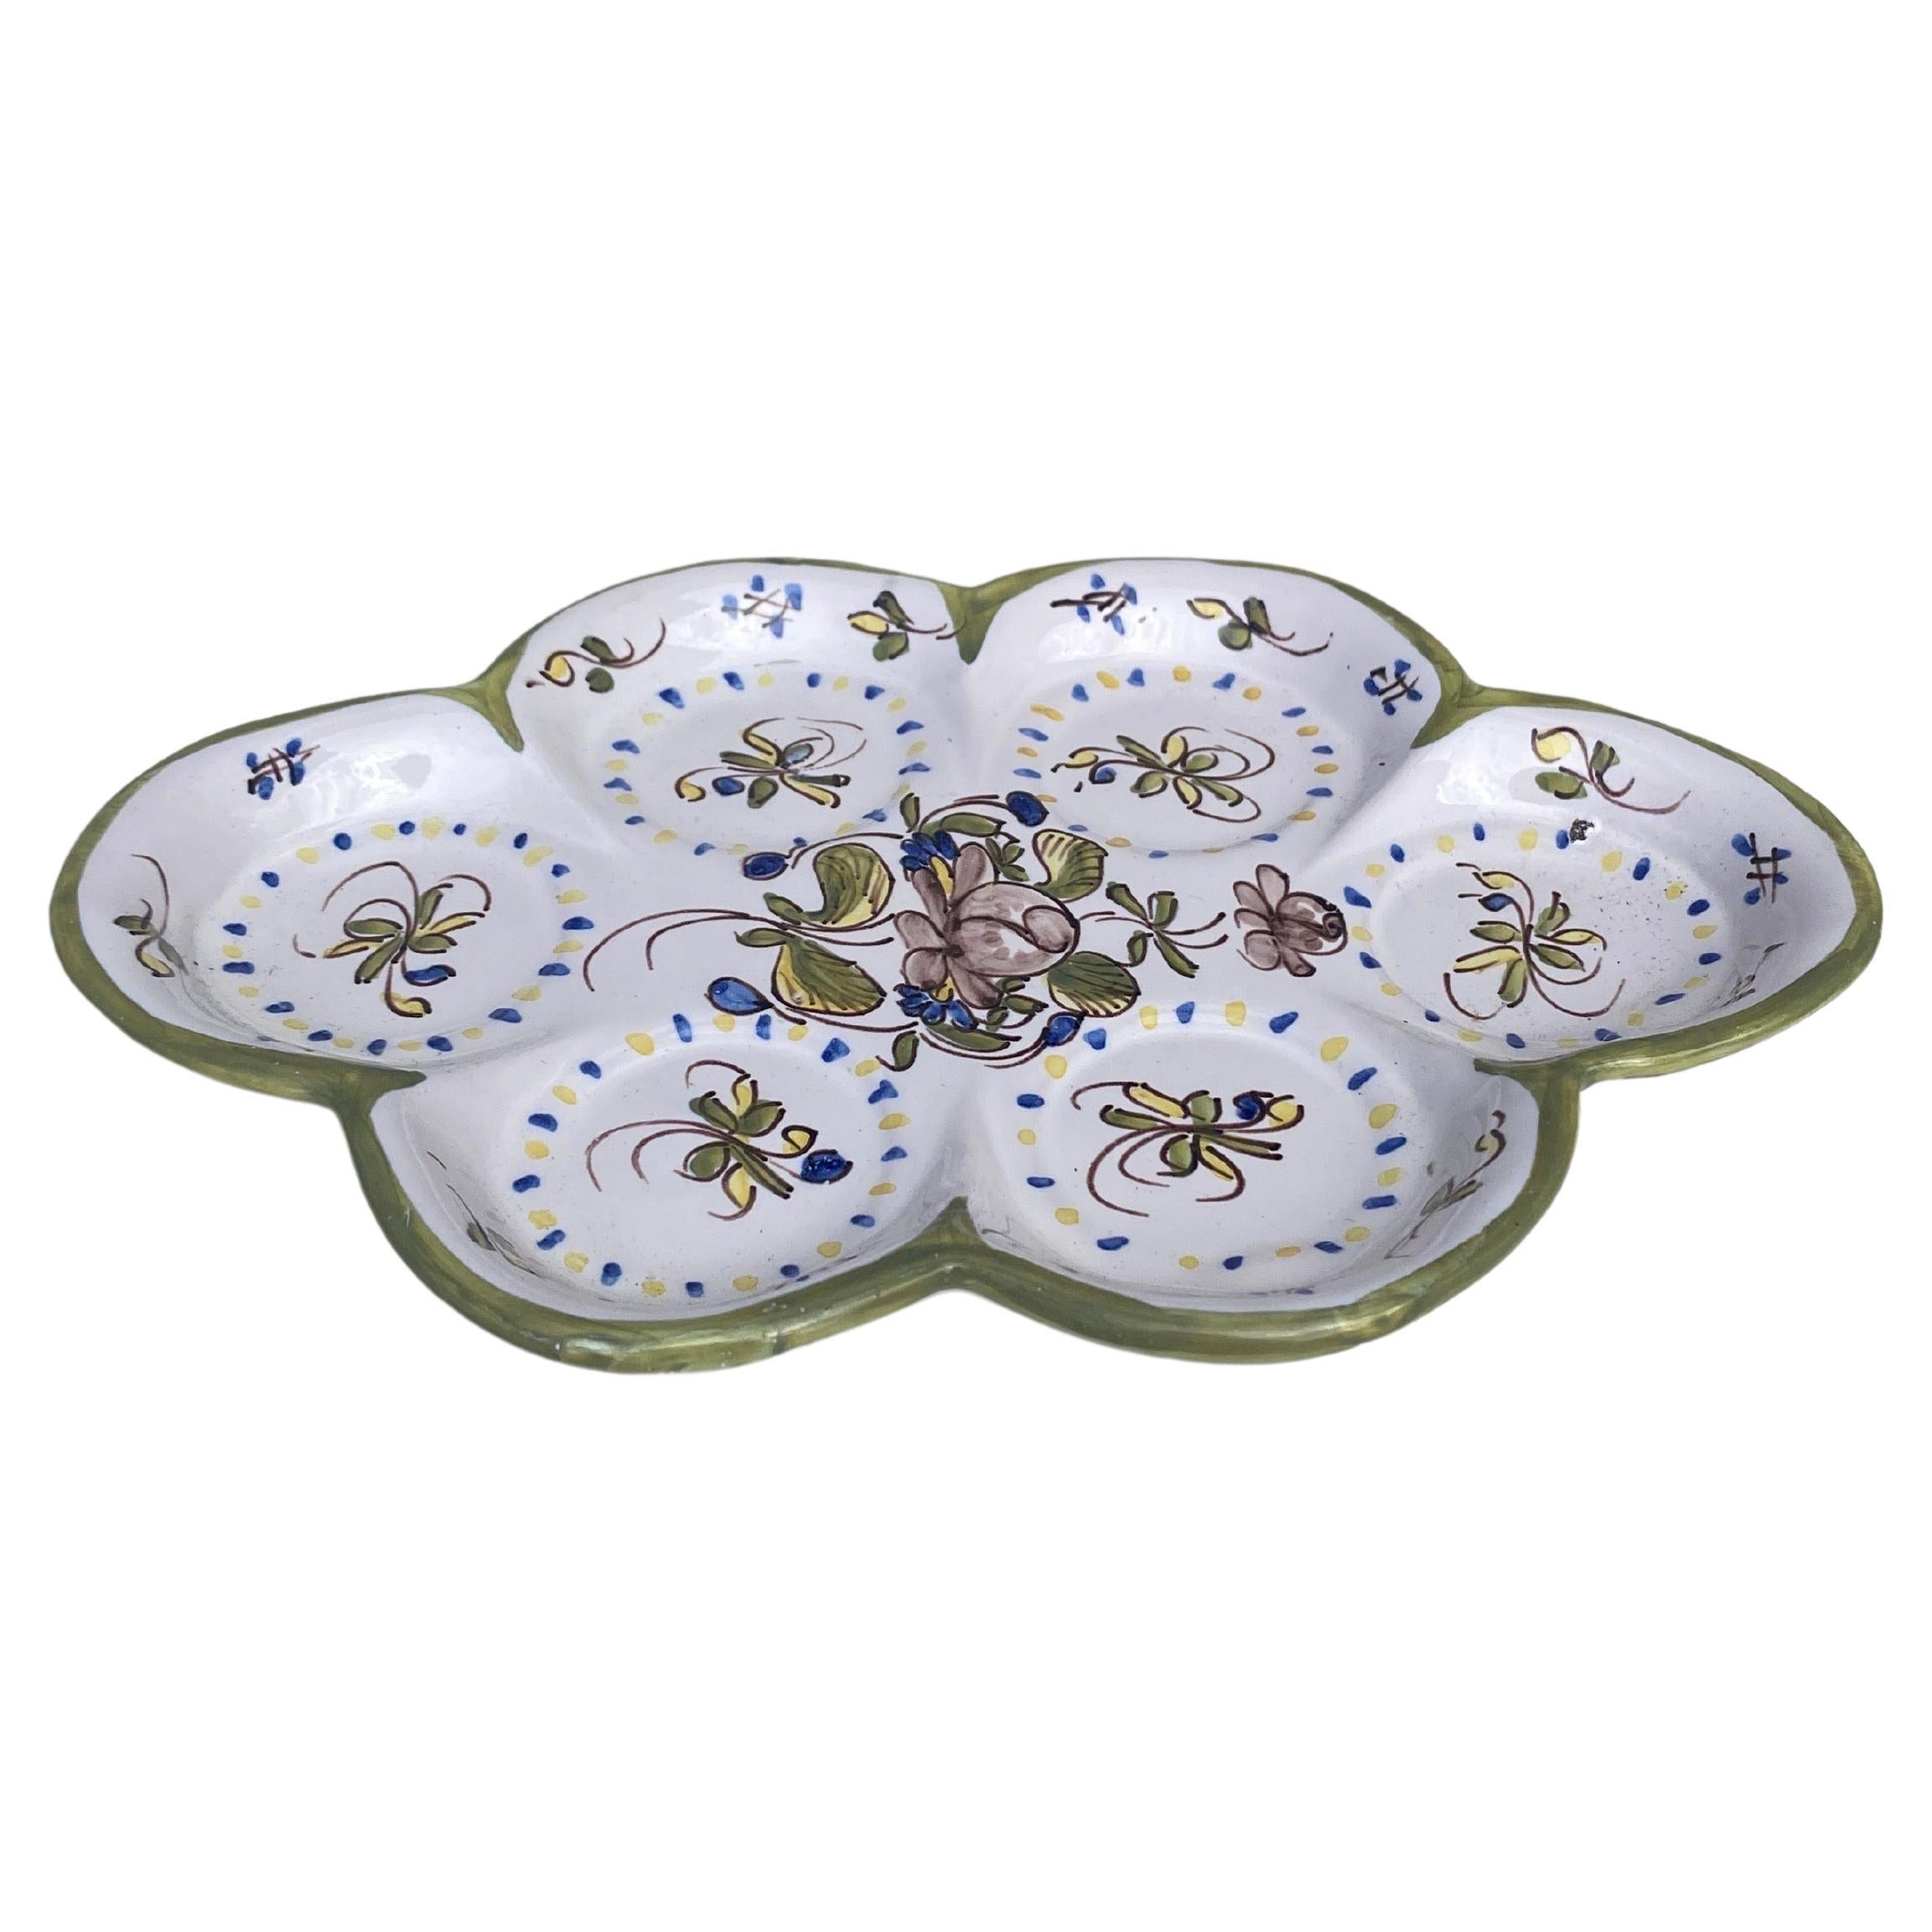 French Oval Faience Platter With Flowers Moustiers Style.
 